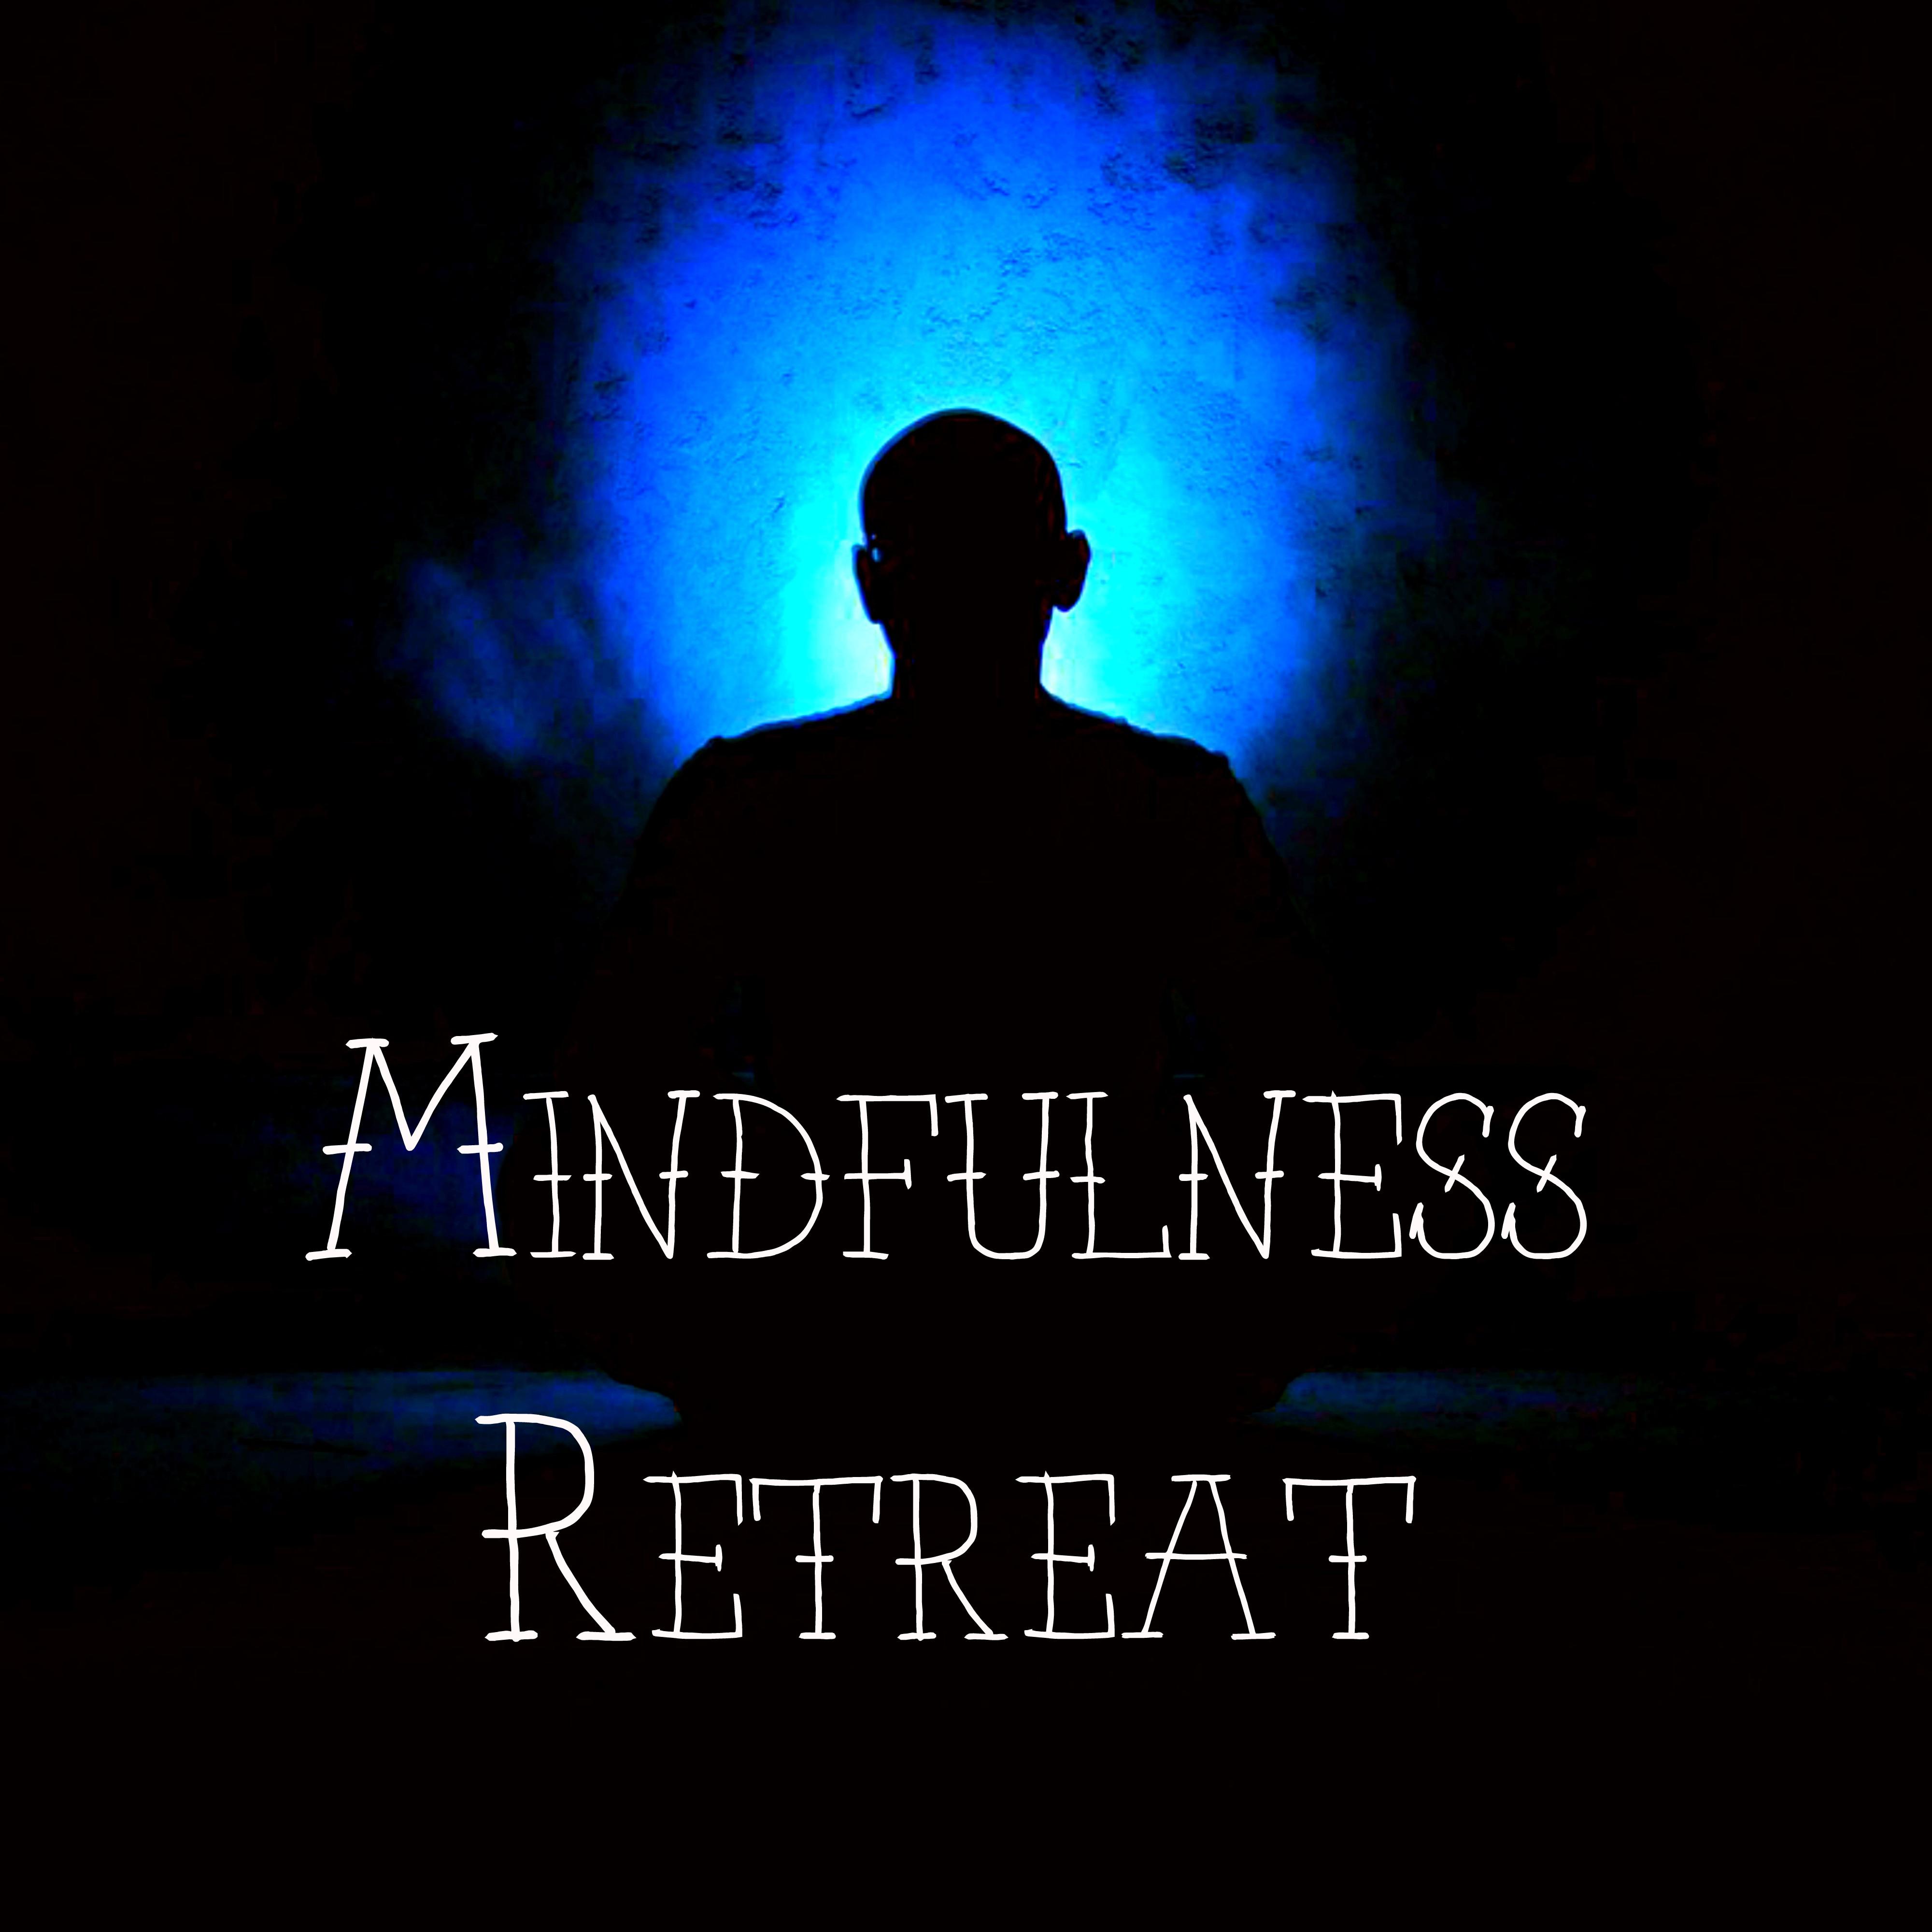 Mindfulness Retreat - Calming Yoga Chakras Soothing Sleep Music with New Age Instrumental Sounds